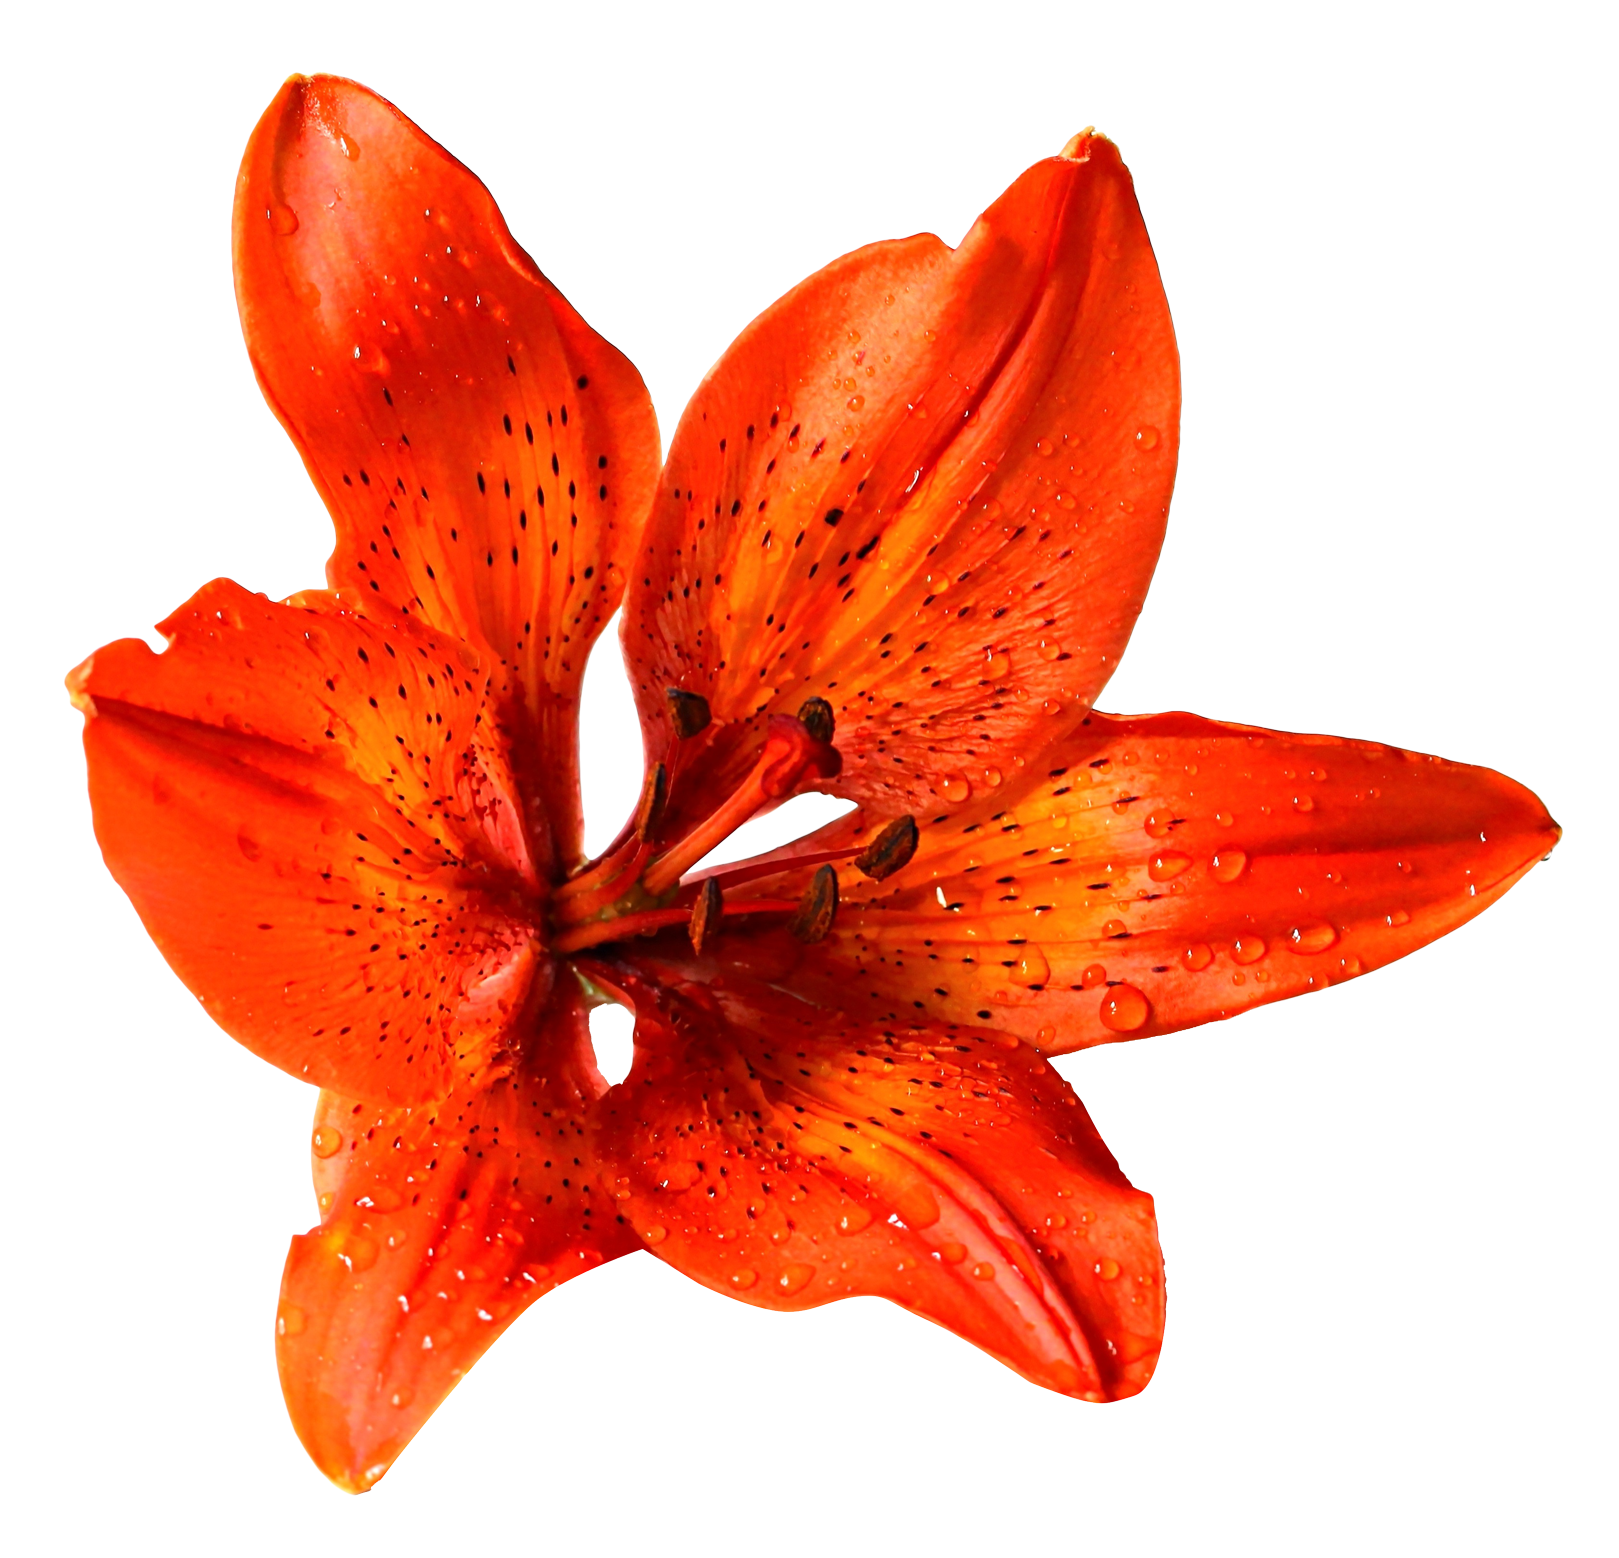 Flower Png Image Purepng Free Transparent Cc0 Png Image Library